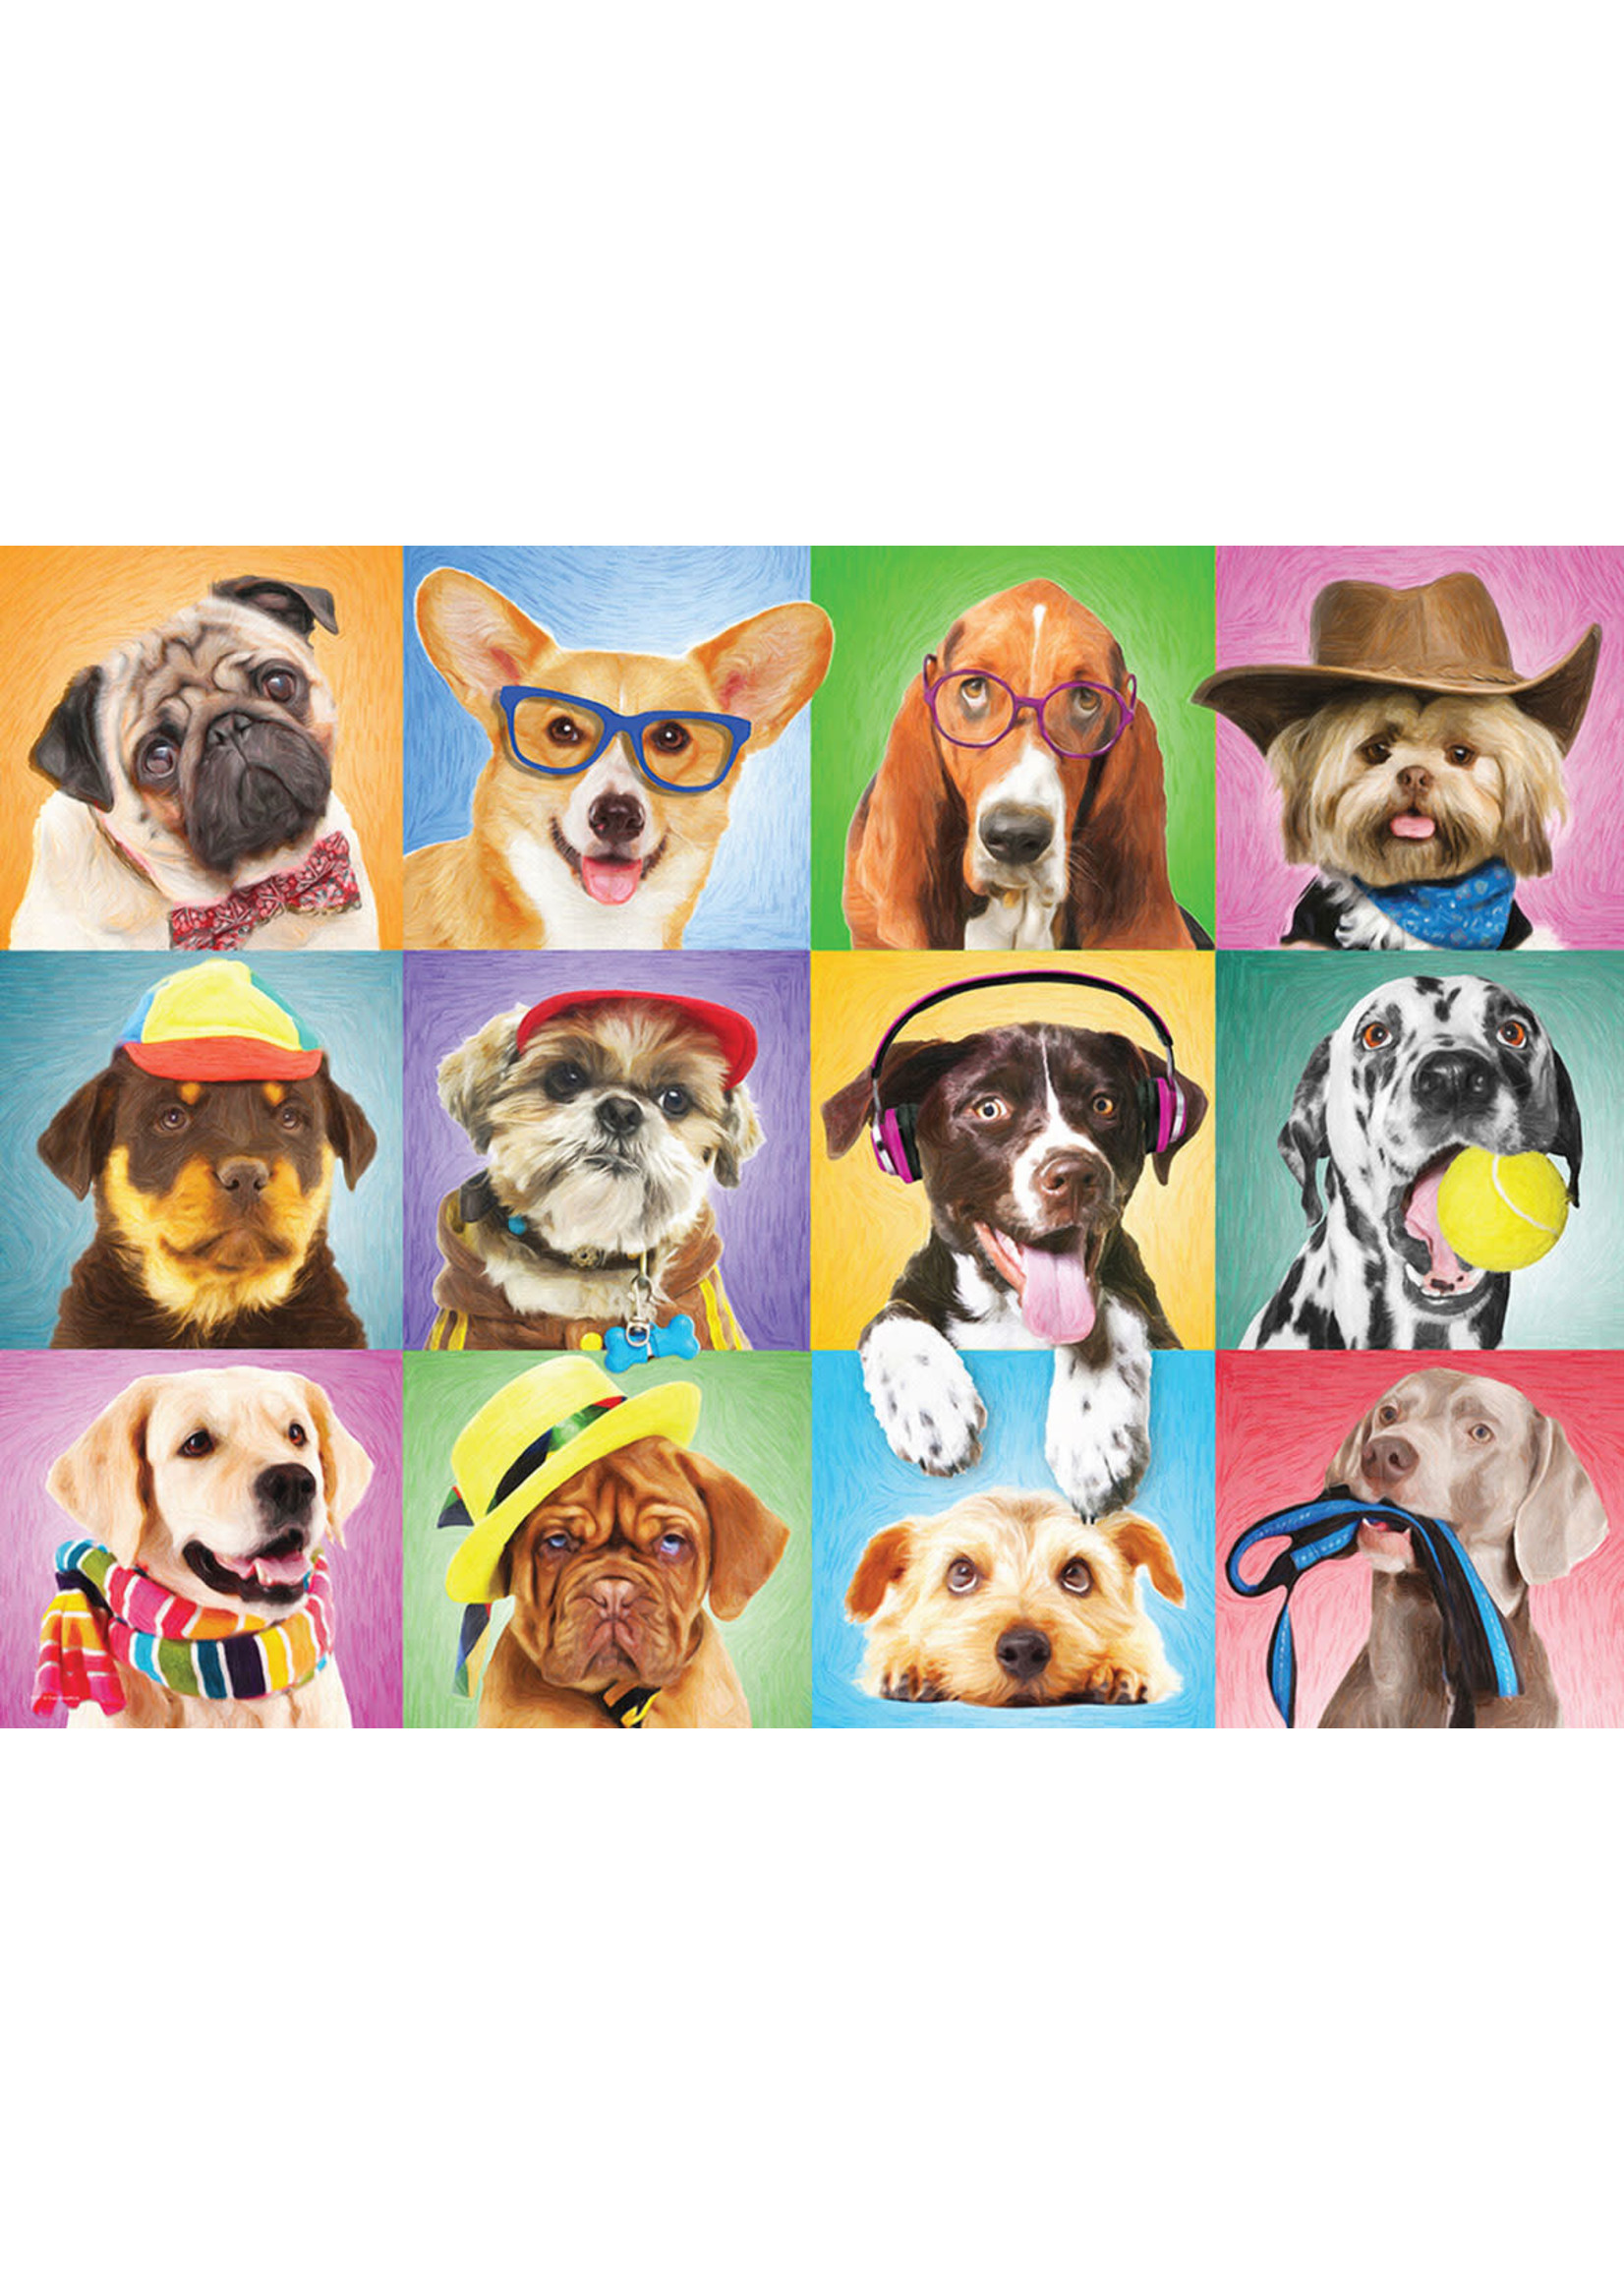 Eurographics "Silly Dogs" 300 Piece Puzzle